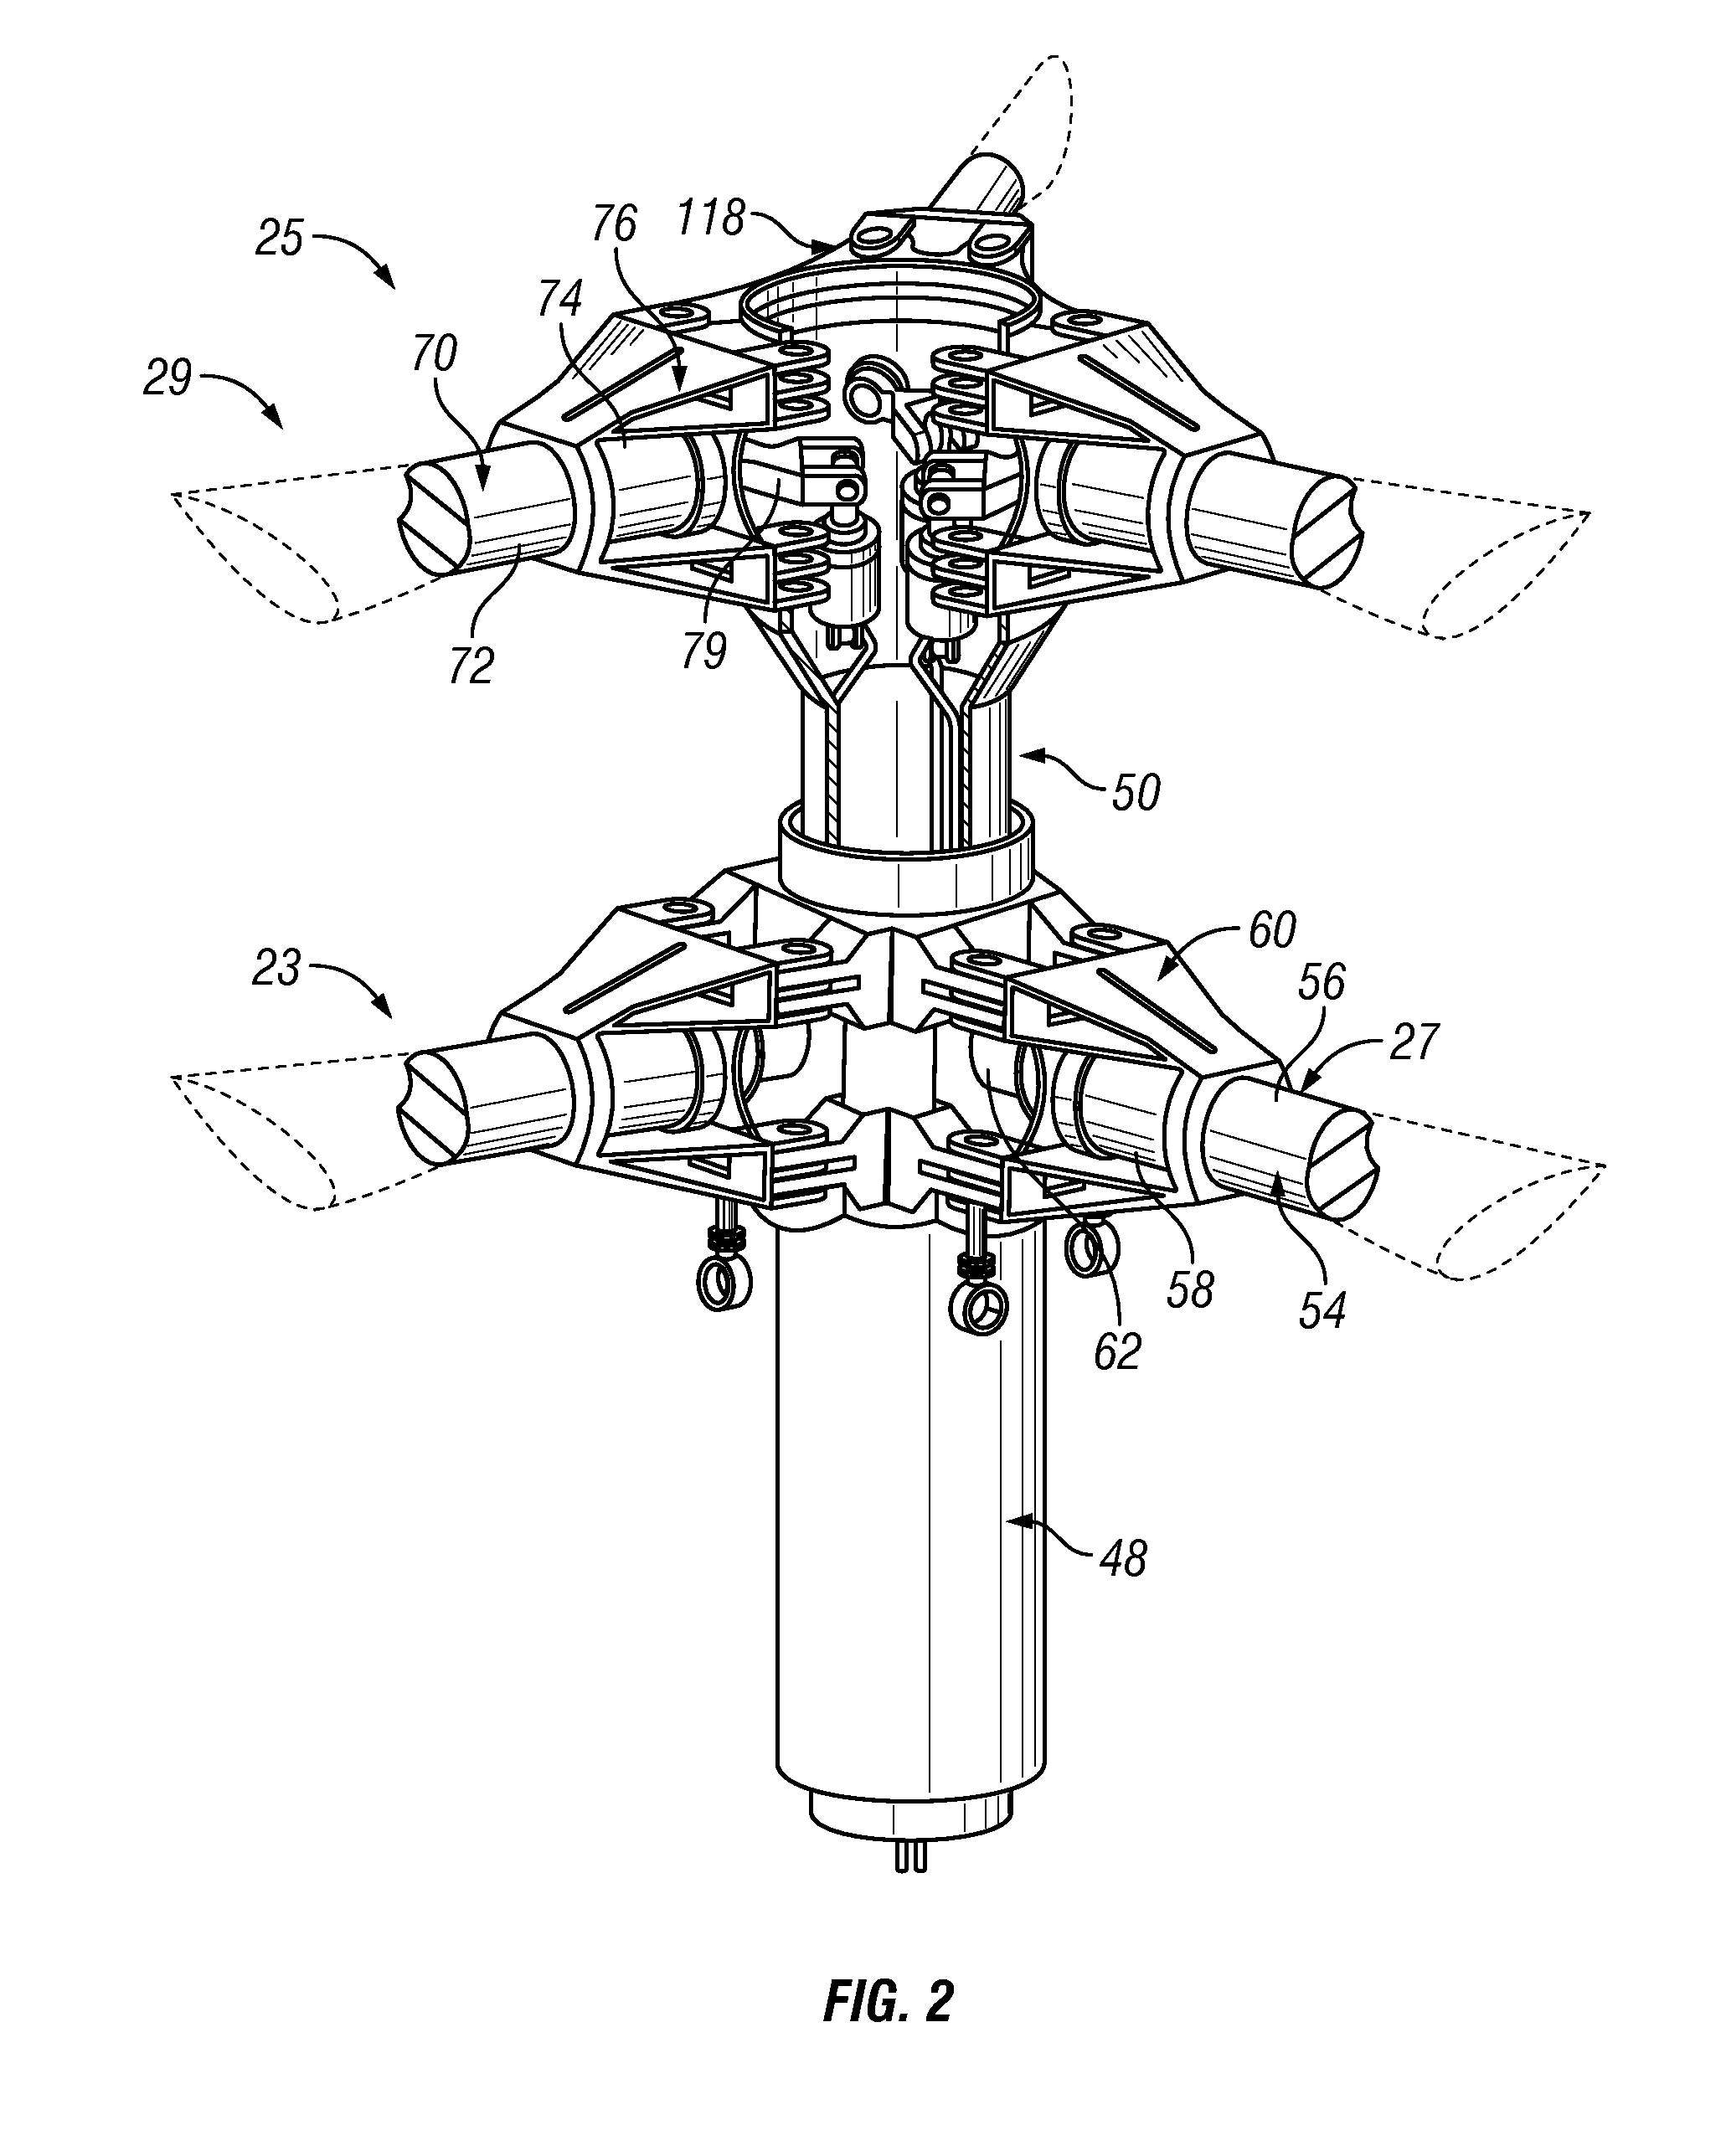 Helicopter rotor control system